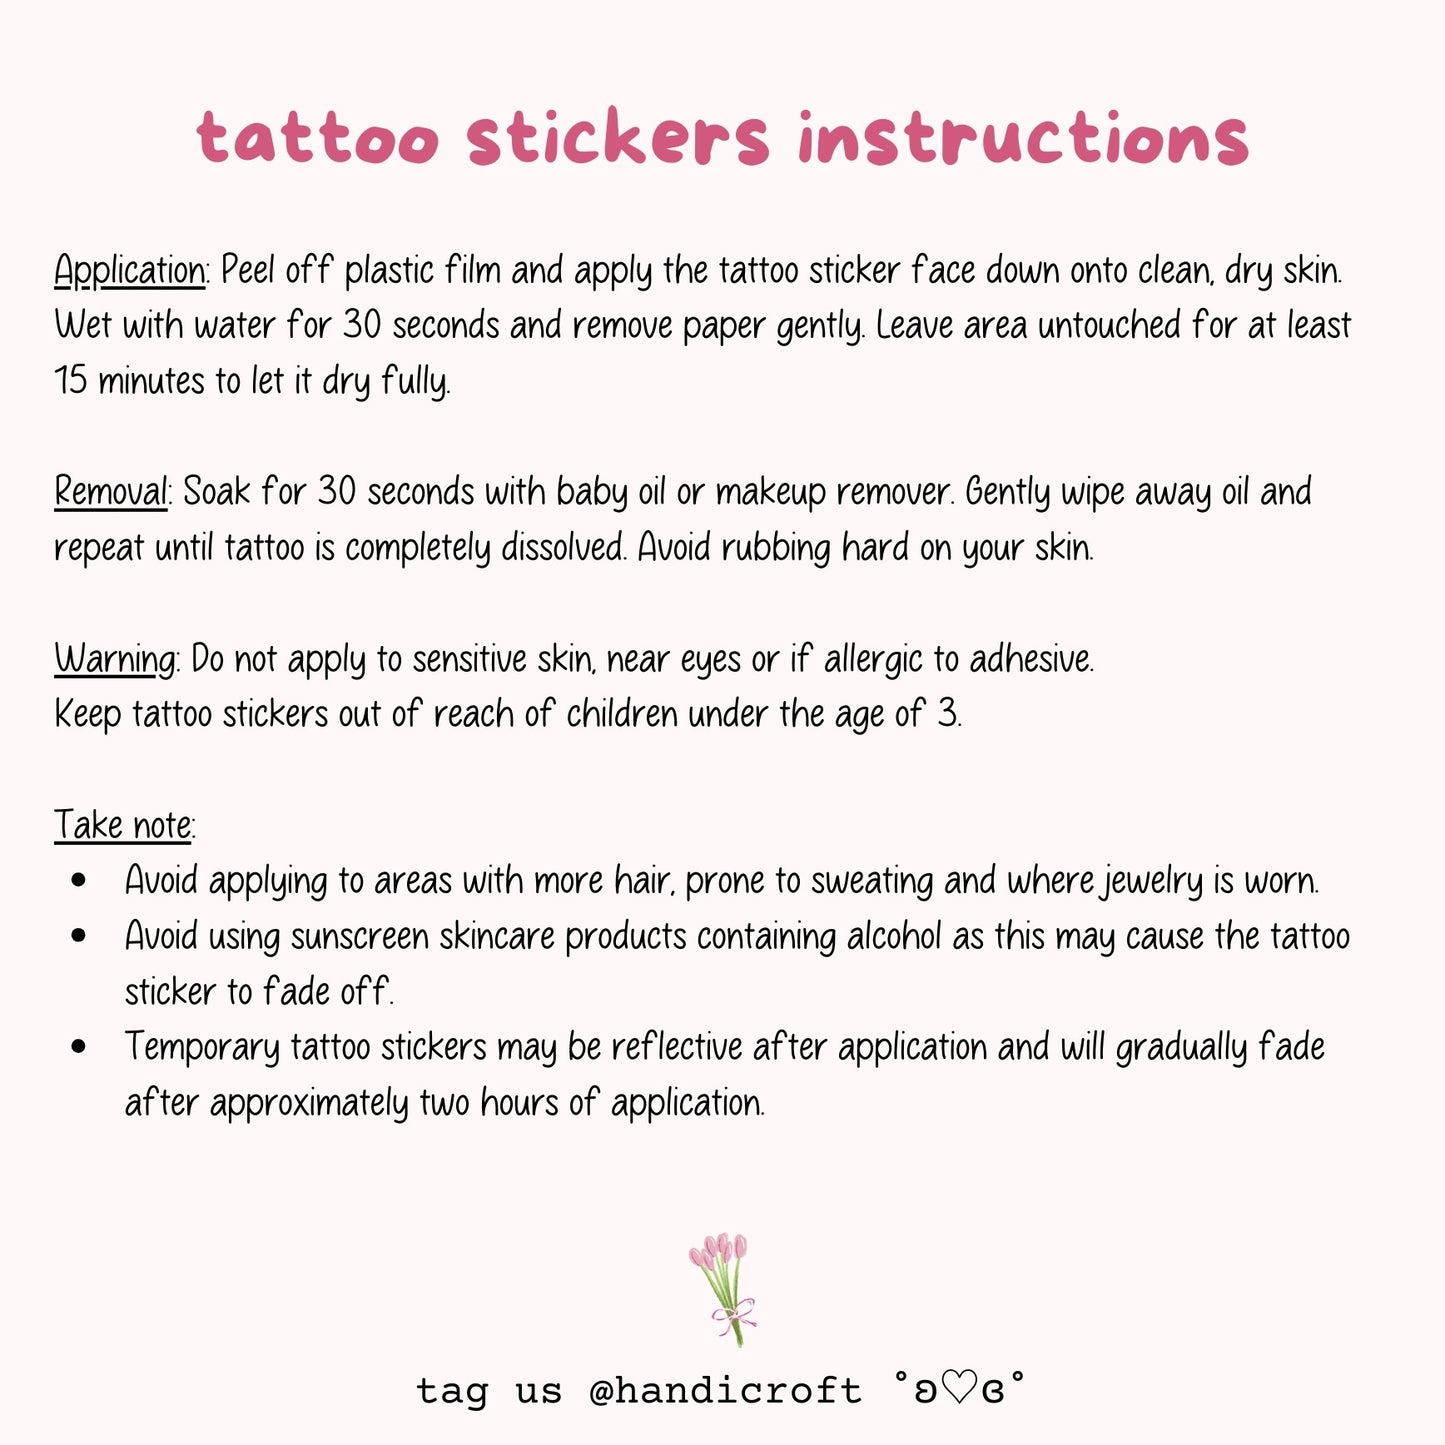 13 (taylor's lucky number) temporary tattoo sticker